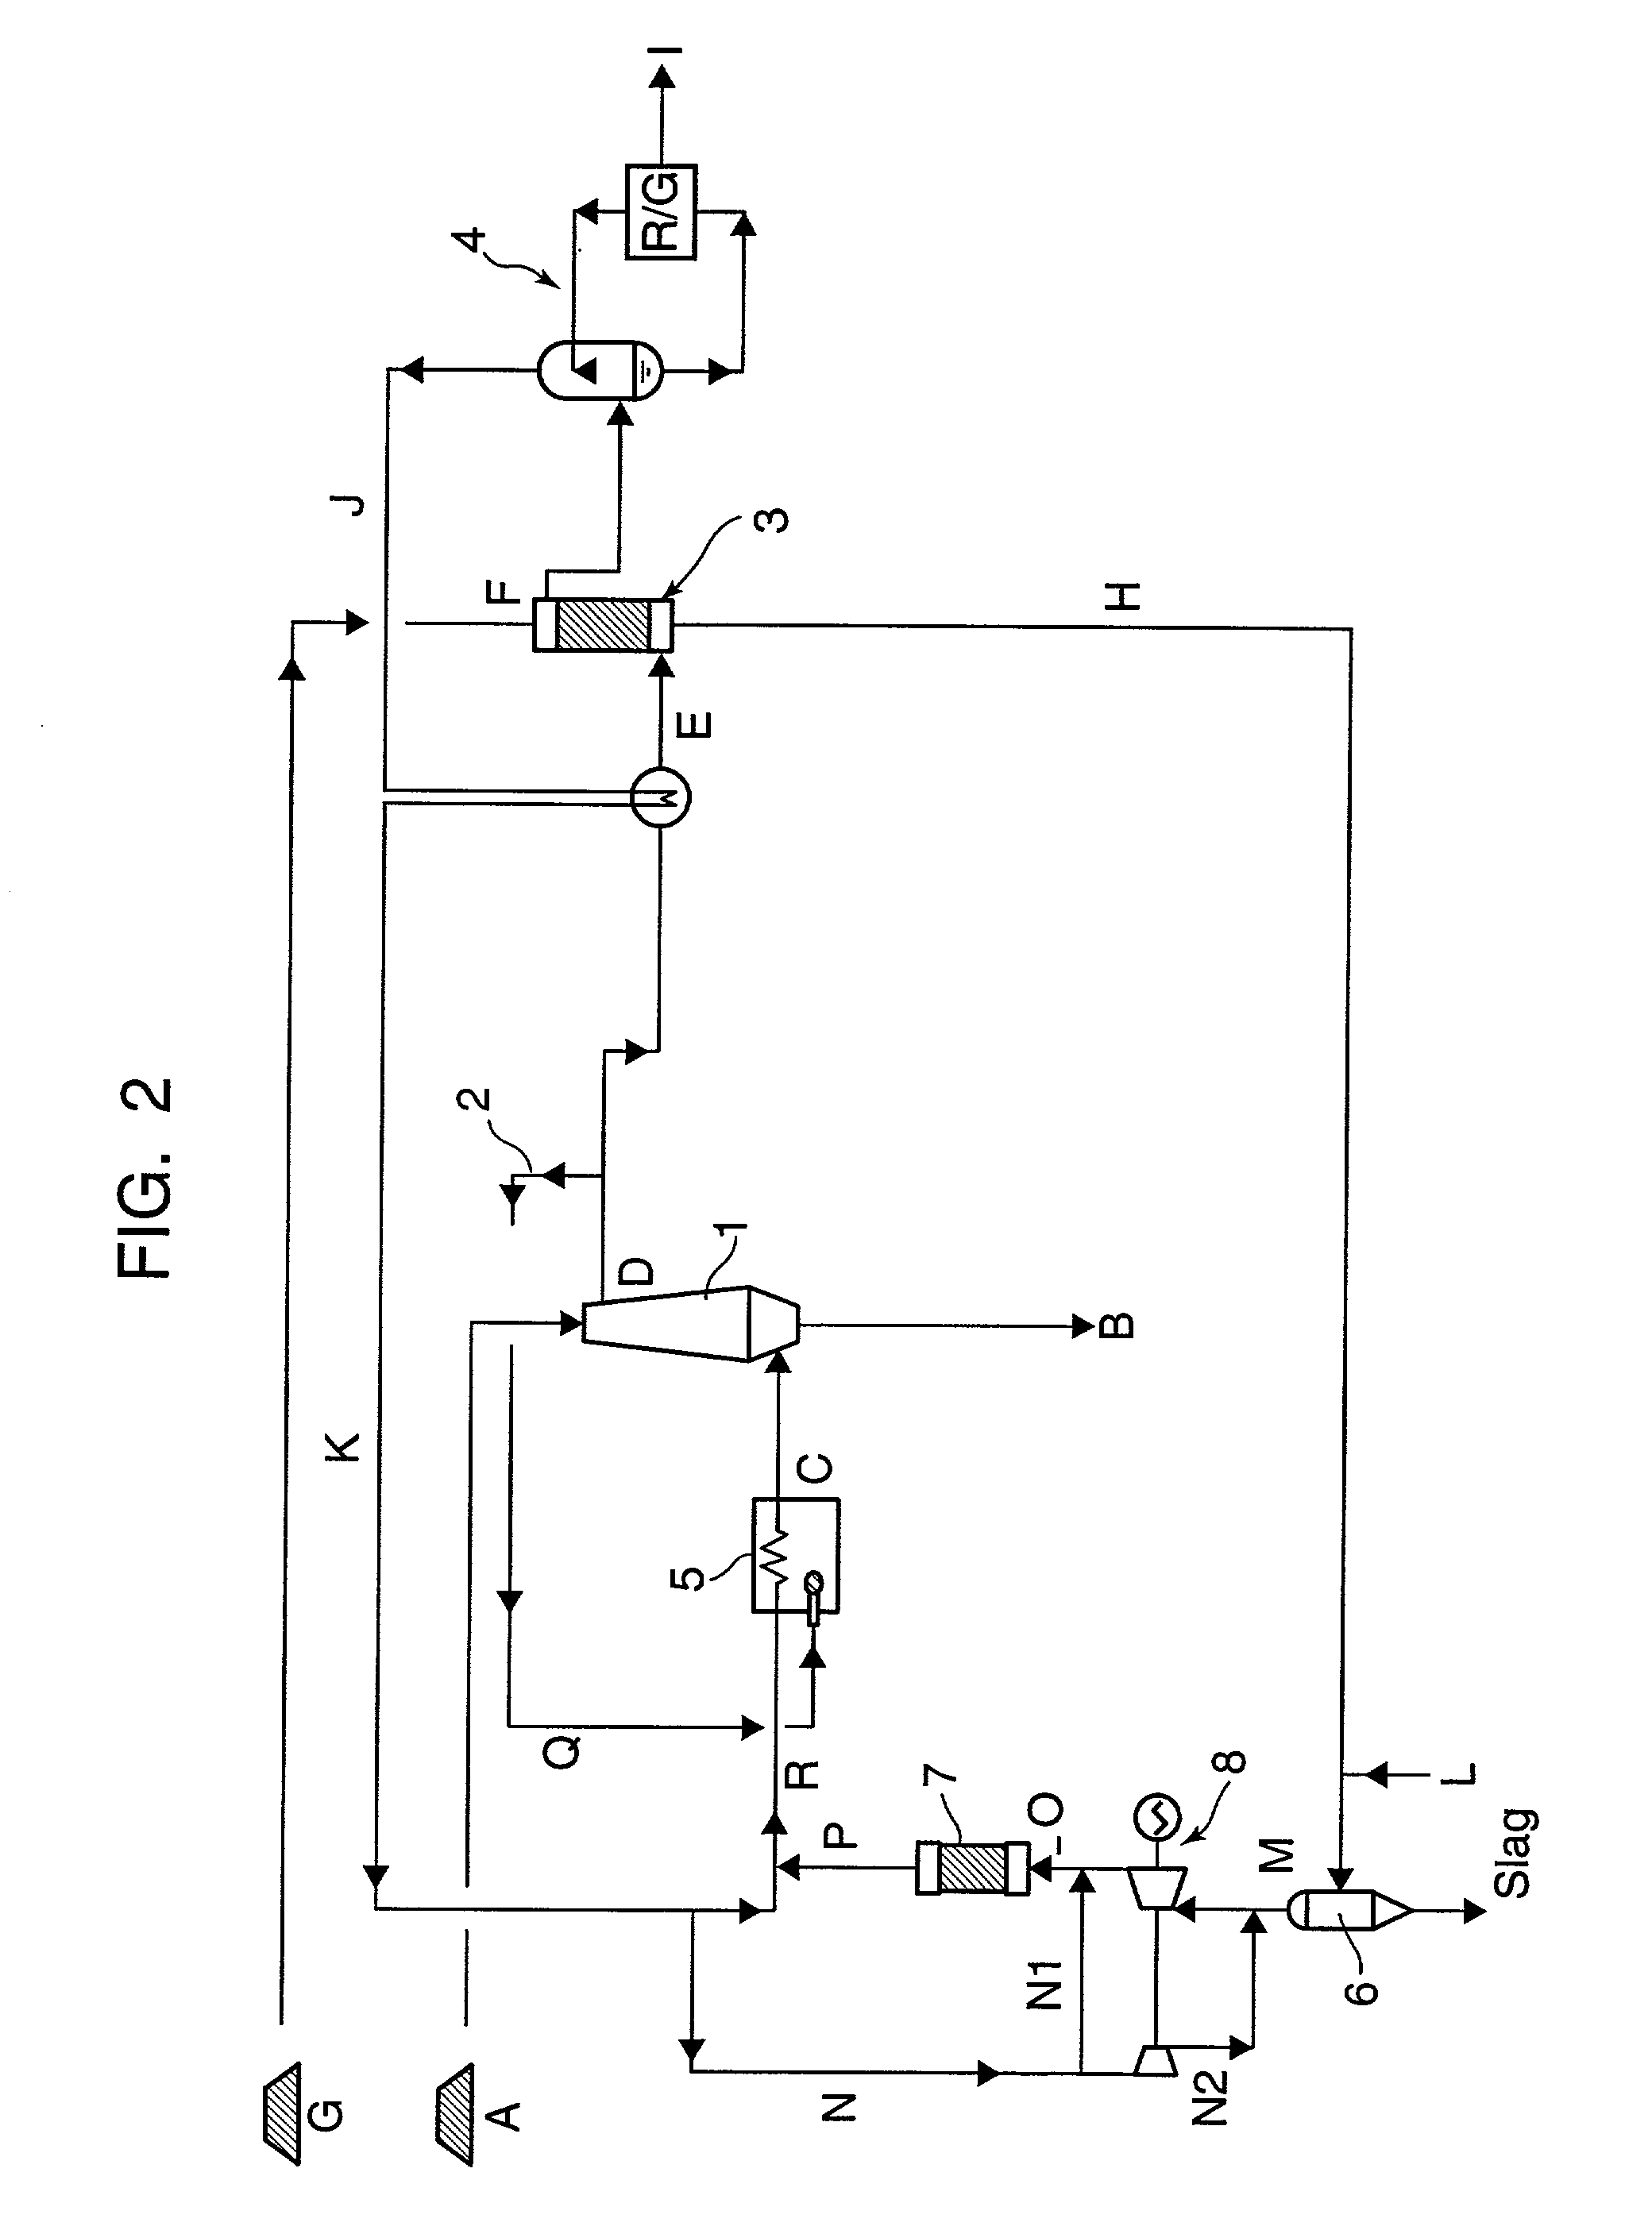 Method of producing direct reduced iron with use of coal-derived gas